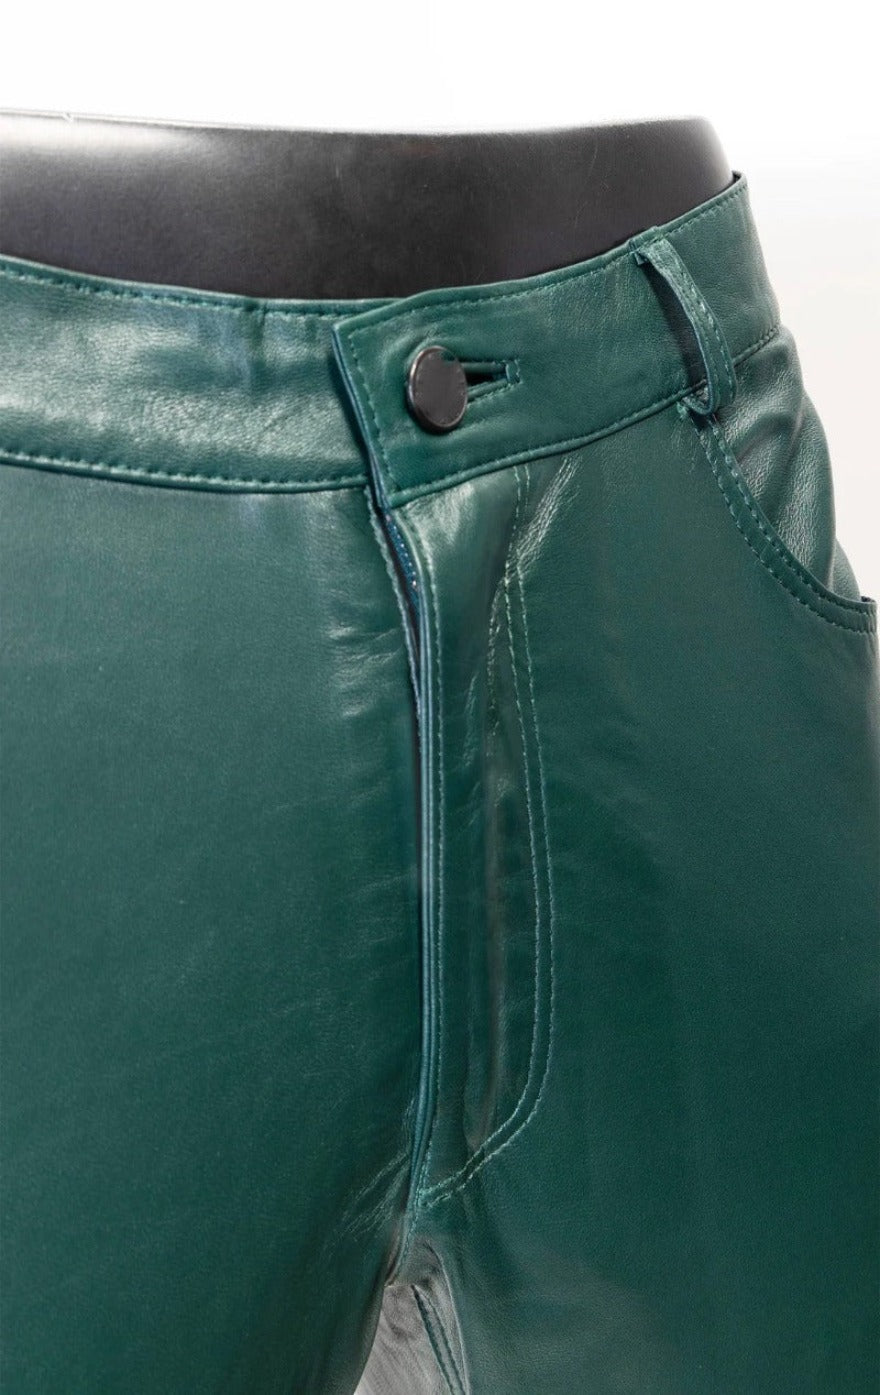 Image of our mens green leather pants on a mannequin, close up view of waist and fly.